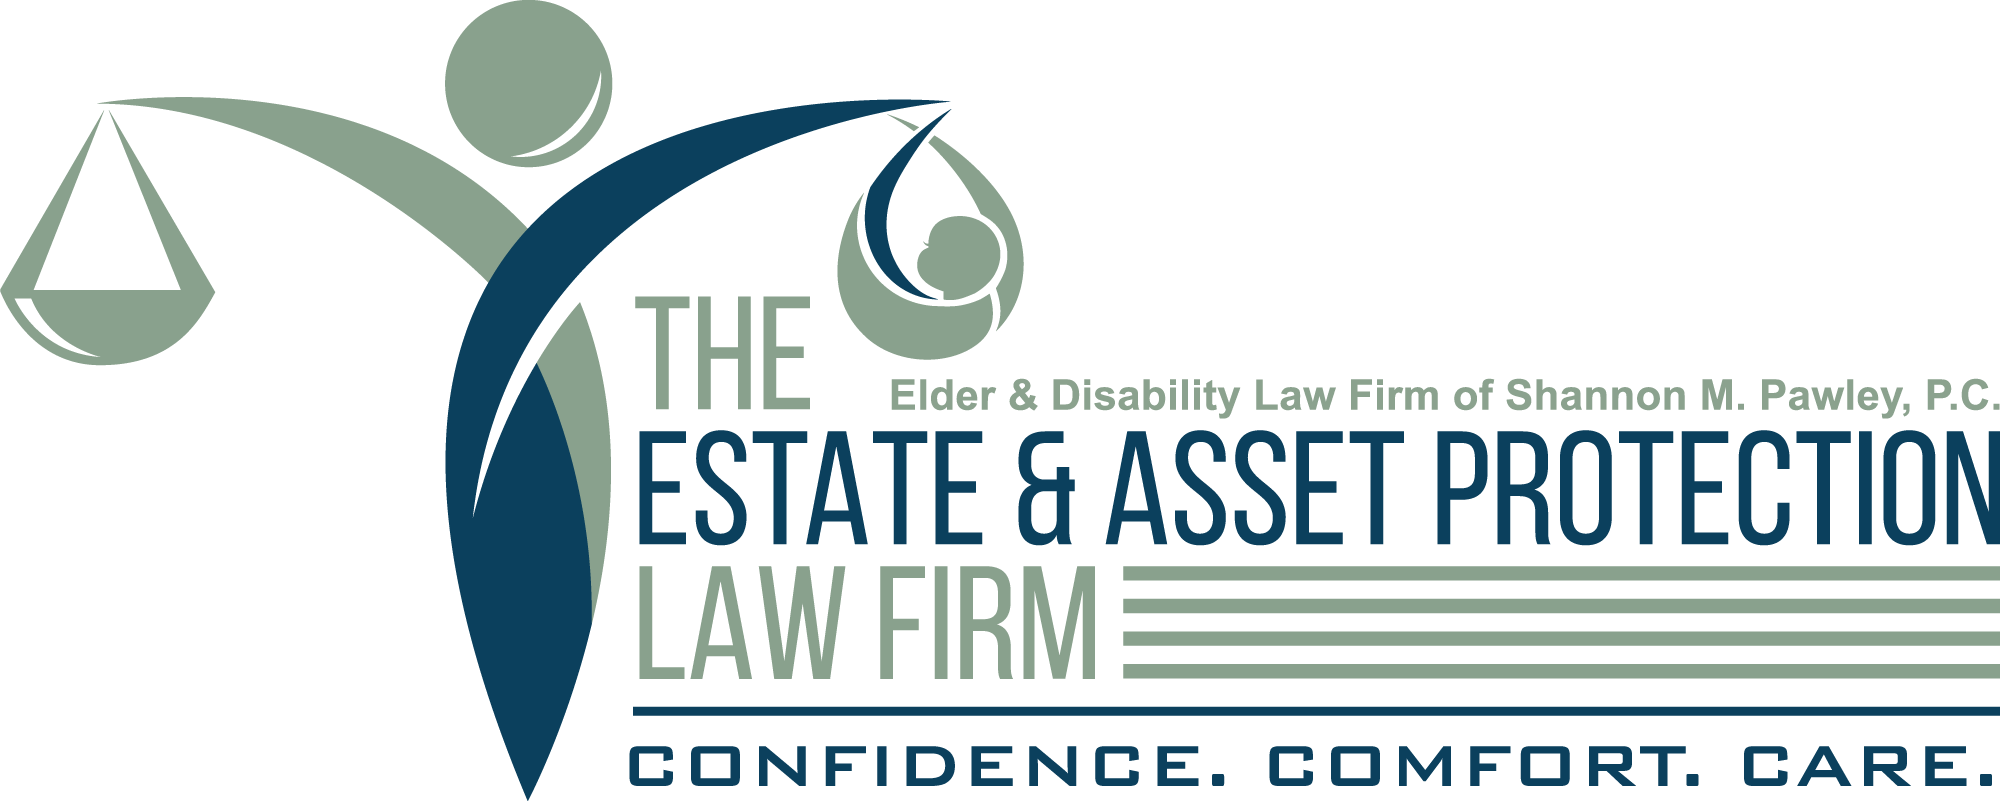 Image of special needs planning estate planning Downs Syndrome disability benefits creating a trust Autism  on estate management asset protection law site